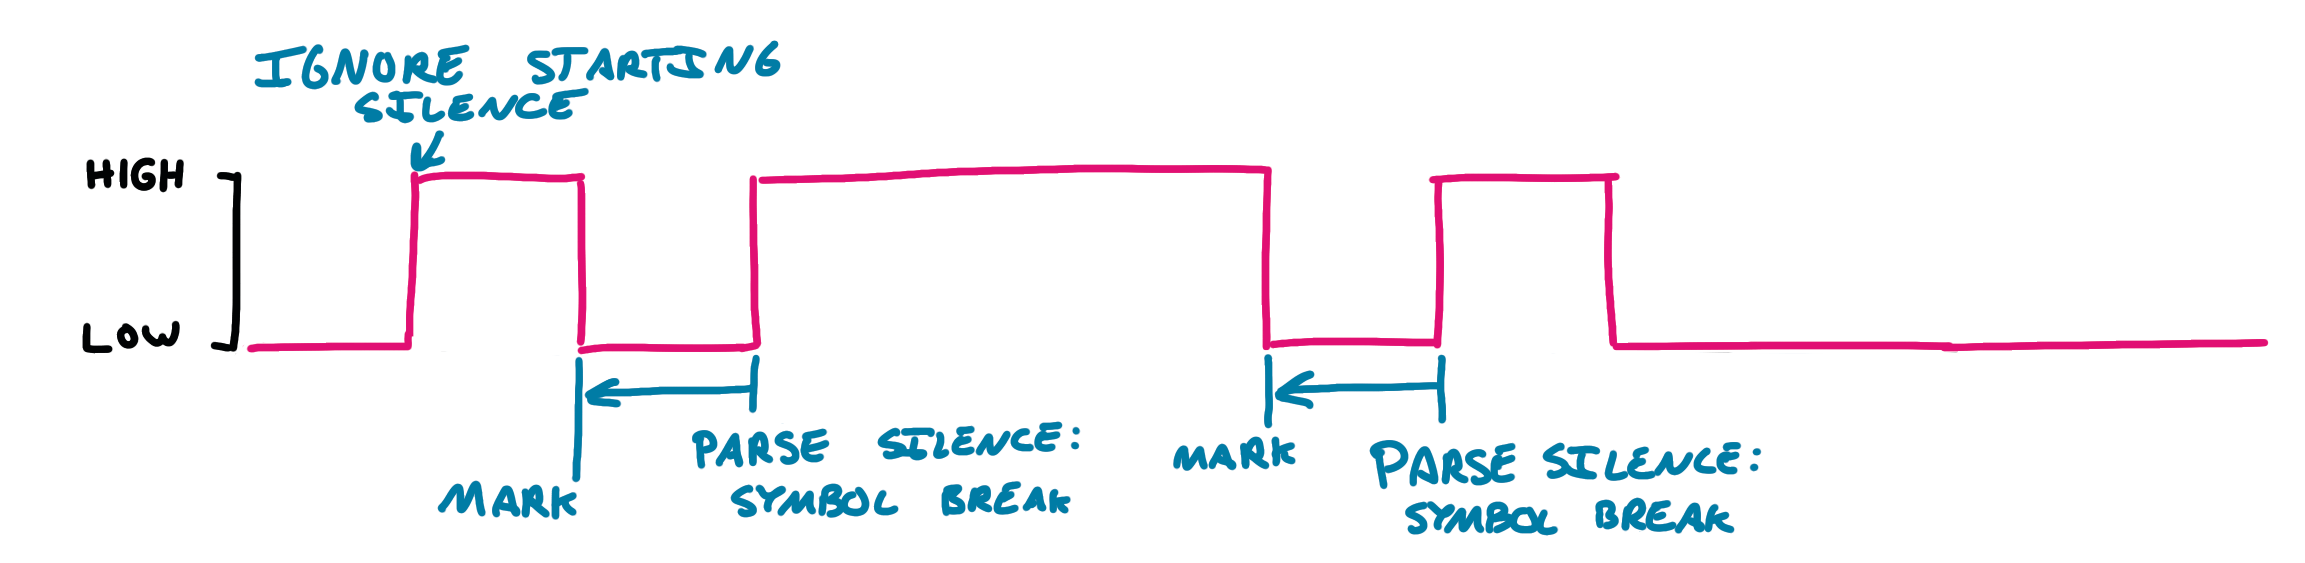 Parsing the silence by looking back